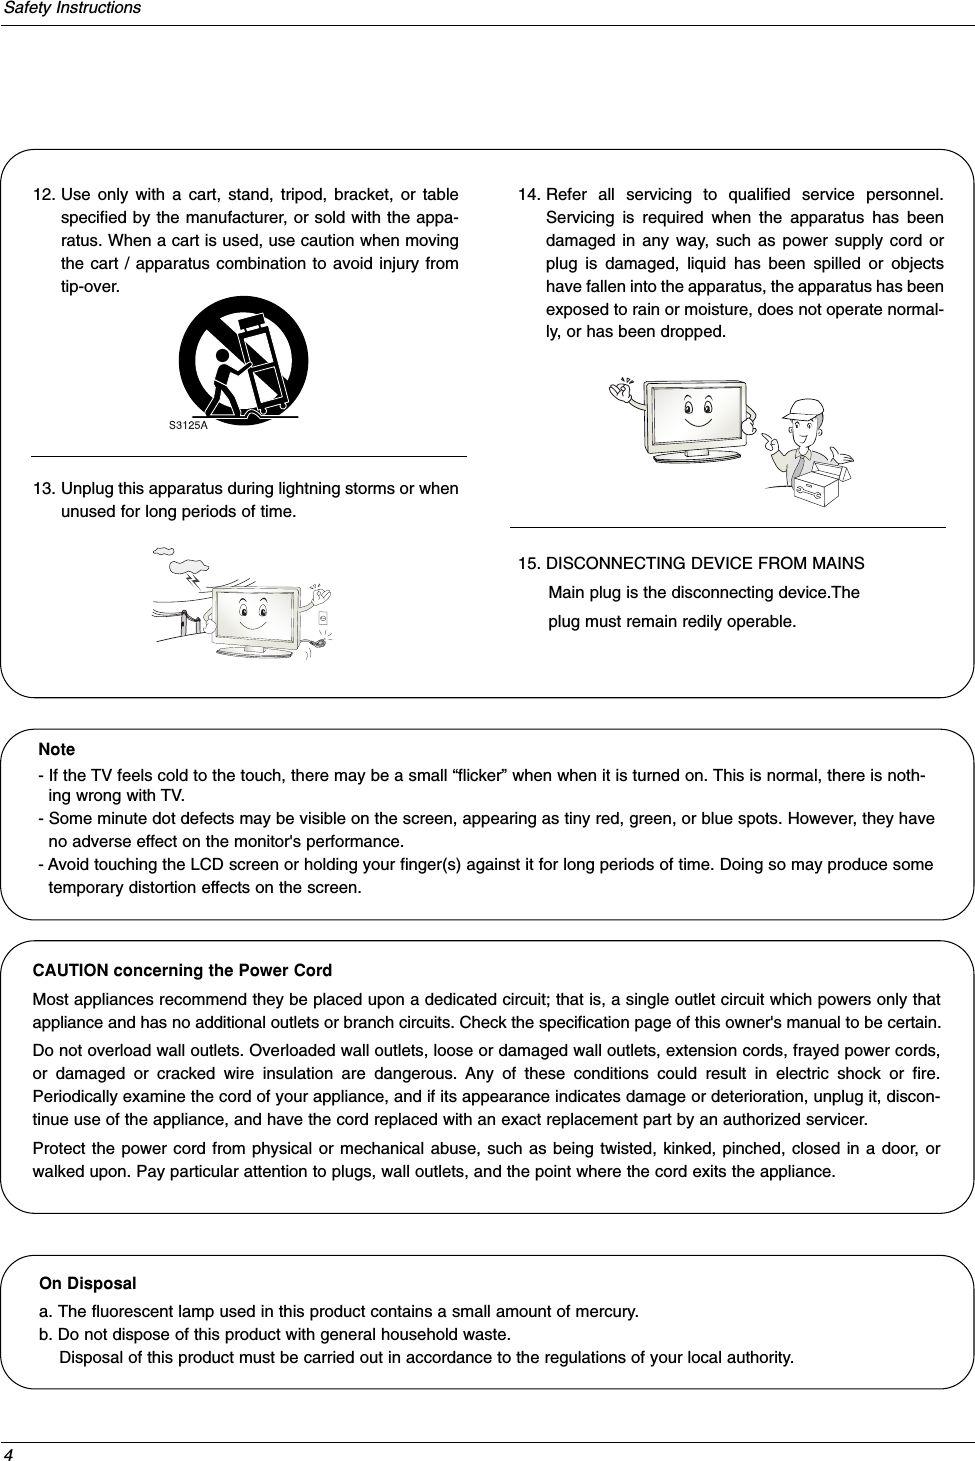 4Safety Instructions12. Use only with a cart, stand, tripod, bracket, or tablespecified by the manufacturer, or sold with the appa-ratus. When a cart is used, use caution when movingthe cart / apparatus combination to avoid injury fromtip-over.13. Unplug this apparatus during lightning storms or whenunused for long periods of time.14. Refer all servicing to qualified service personnel.Servicing is required when the apparatus has beendamaged in any way, such as power supply cord orplug is damaged, liquid has been spilled or objectshave fallen into the apparatus, the apparatus has beenexposed to rain or moisture, does not operate normal-ly, or has been dropped.15. DISCONNECTING DEVICE FROM MAINSMain plug is the disconnecting device.Theplug must remain redily operable.On Disposal a. The fluorescent lamp used in this product contains a small amount of mercury.b. Do not dispose of this product with general household waste.Disposal of this product must be carried out in accordance to the regulations of your local authority.Note- If the TV feels cold to the touch, there may be a small “flicker” when when it is turned on. This is normal, there is noth-ing wrong with TV.- Some minute dot defects may be visible on the screen, appearing as tiny red, green, or blue spots. However, they haveno adverse effect on the monitor&apos;s performance.- Avoid touching the LCD screen or holding your finger(s) against it for long periods of time. Doing so may produce sometemporary distortion effects on the screen.CAUTION concerning the Power CordMost appliances recommend they be placed upon a dedicated circuit; that is, a single outlet circuit which powers only thatappliance and has no additional outlets or branch circuits. Check the specification page of this owner&apos;s manual to be certain.Do not overload wall outlets. Overloaded wall outlets, loose or damaged wall outlets, extension cords, frayed power cords,or damaged or cracked wire insulation are dangerous. Any of these conditions could result in electric shock or fire.Periodically examine the cord of your appliance, and if its appearance indicates damage or deterioration, unplug it, discon-tinue use of the appliance, and have the cord replaced with an exact replacement part by an authorized servicer.Protect the power cord from physical or mechanical abuse, such as being twisted, kinked, pinched, closed in a door, orwalked upon. Pay particular attention to plugs, wall outlets, and the point where the cord exits the appliance.